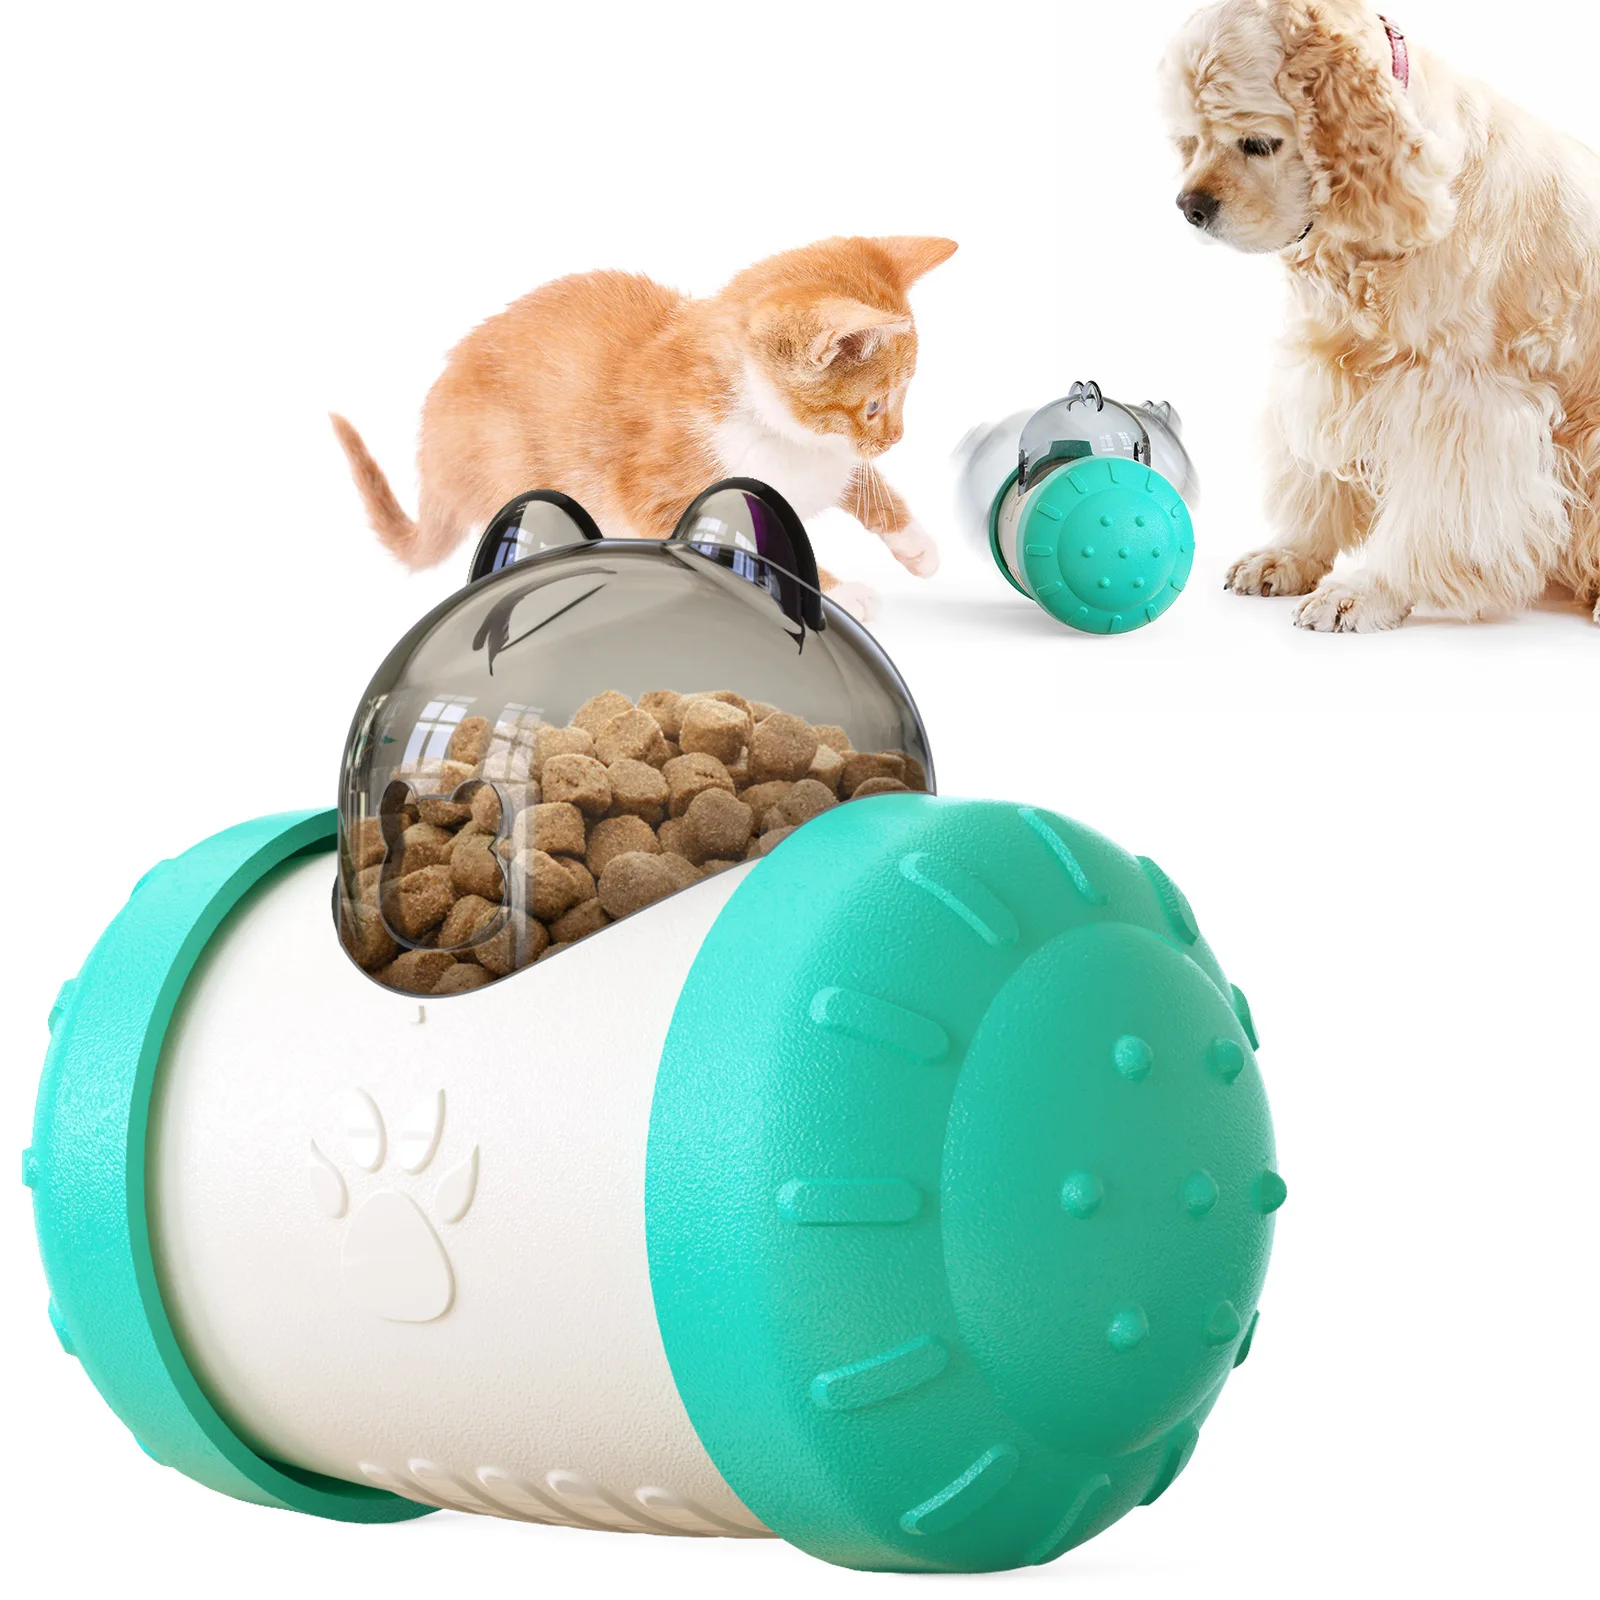 

Dog Toy Interactive IQ Food Dispensing Tumbler Ball Slow Feeder Leakage Chew Chasing For Dog Cat Playing Training Pet Supplies